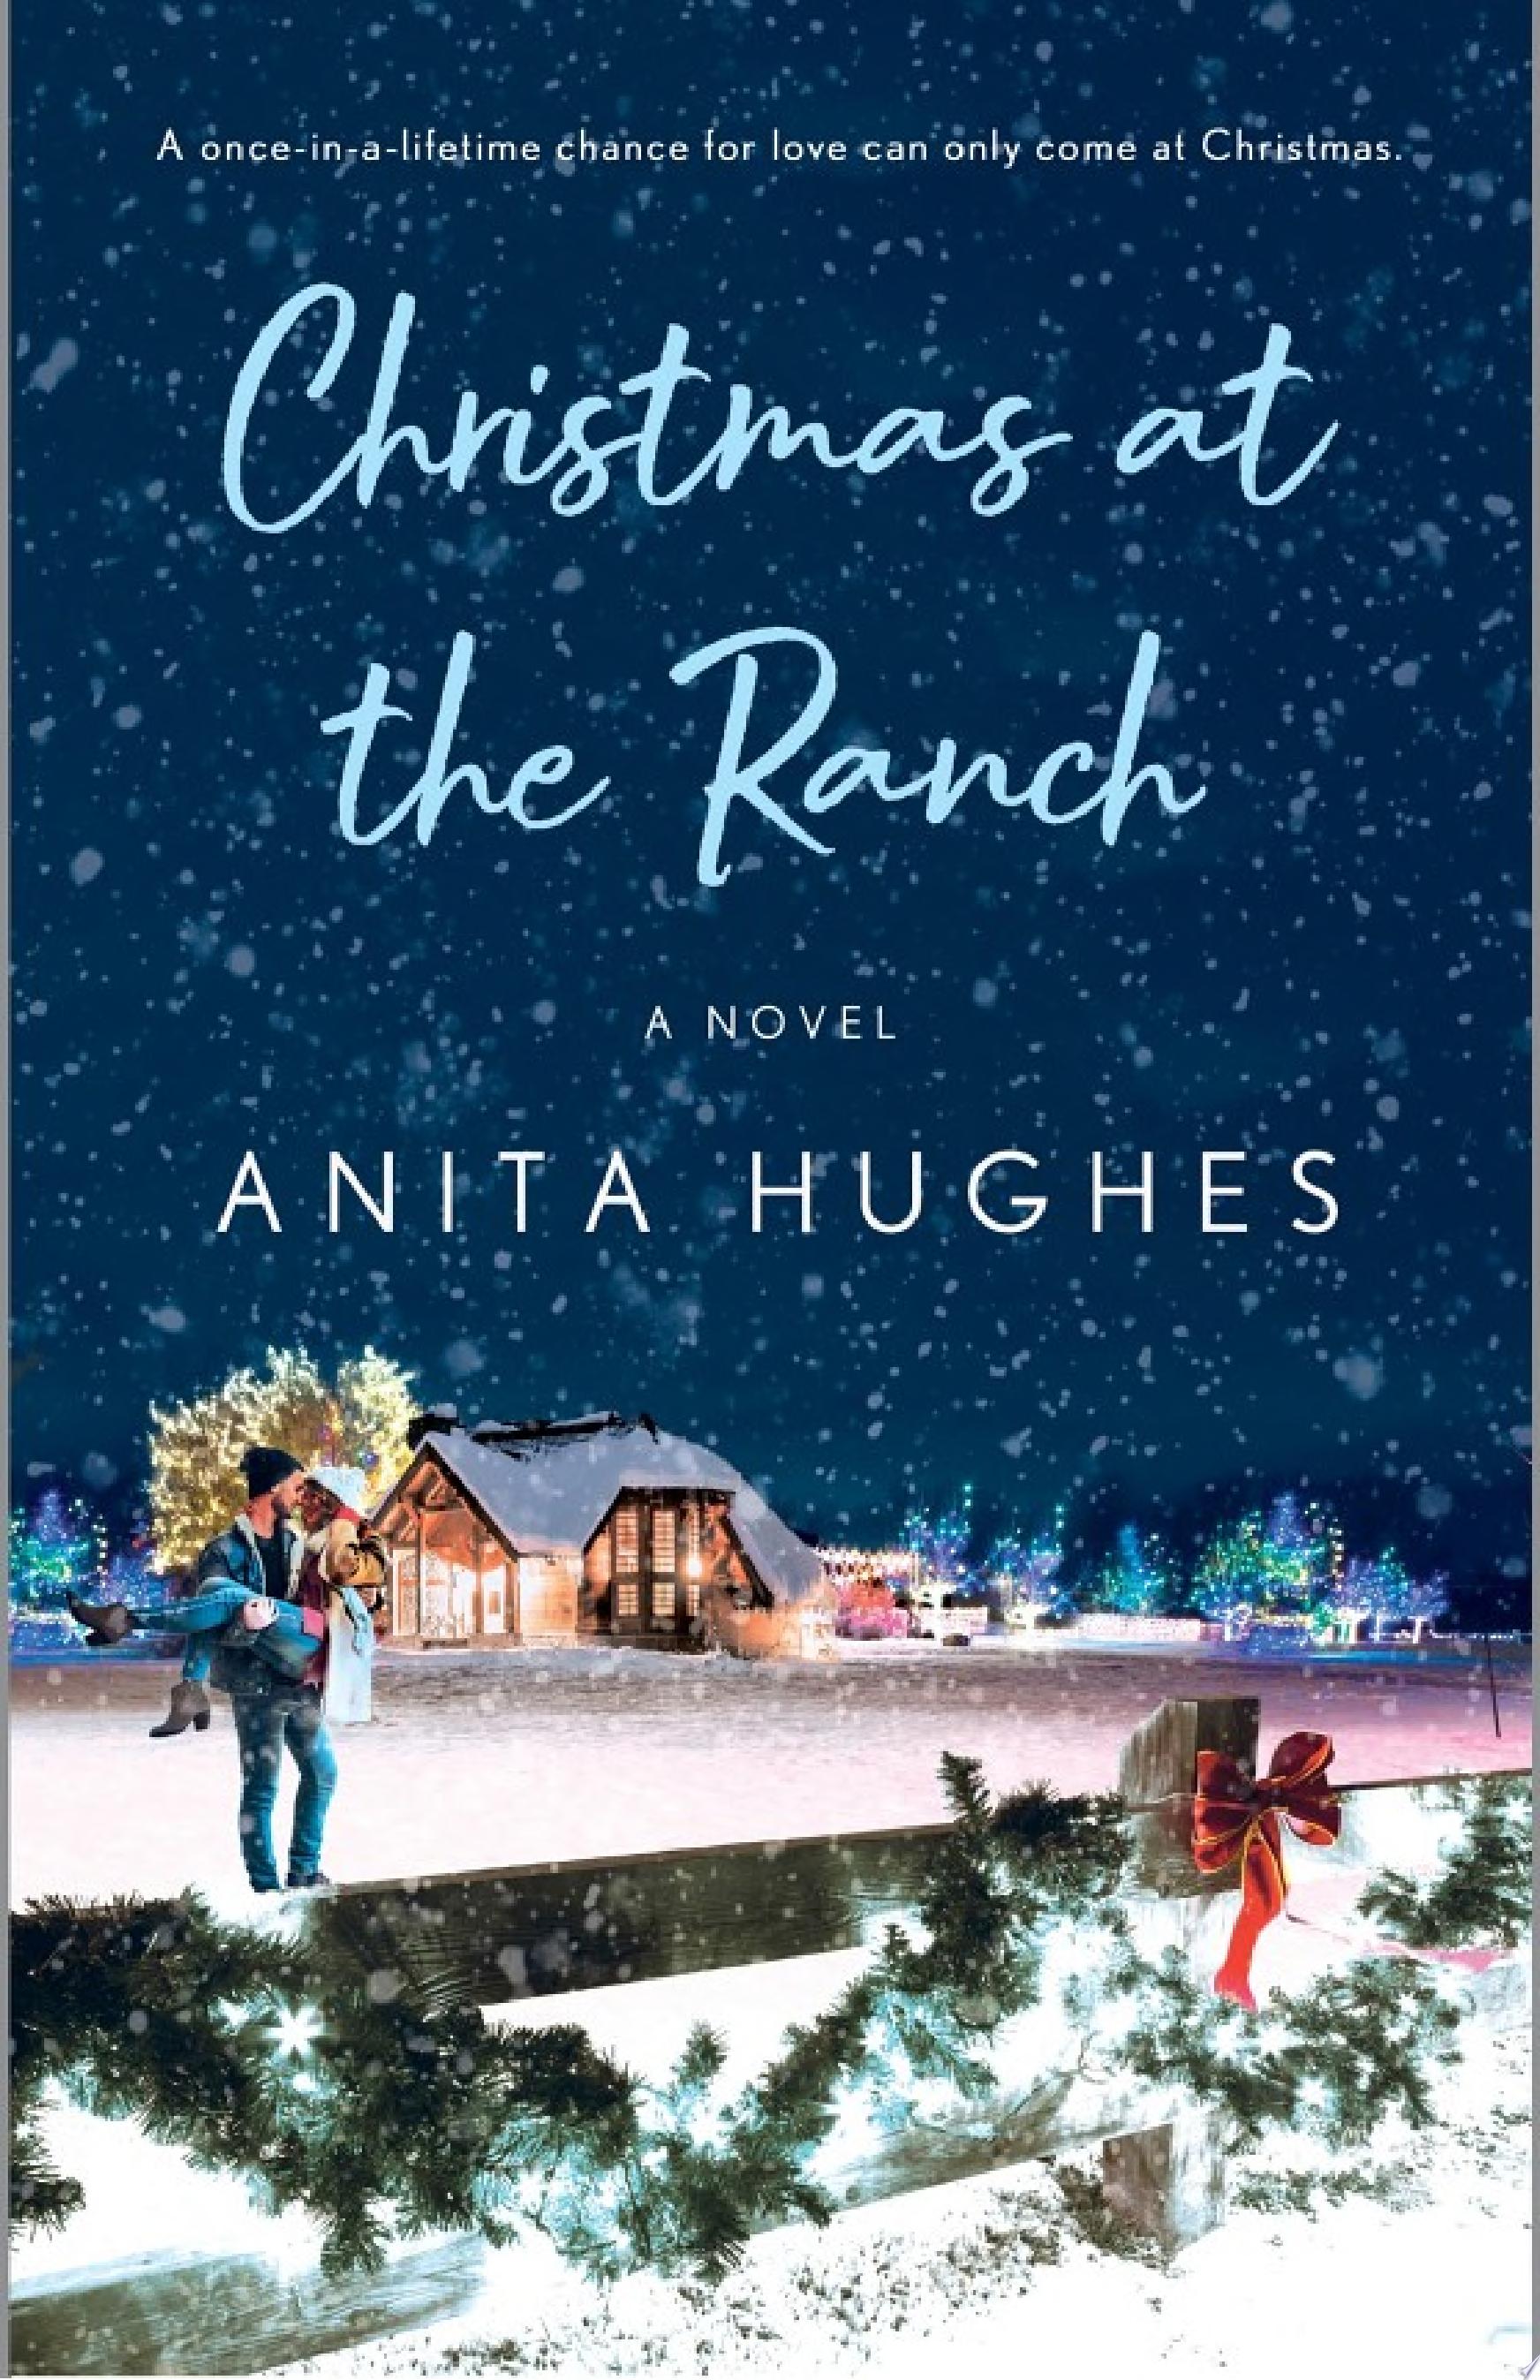 Image for "Christmas at the Ranch"